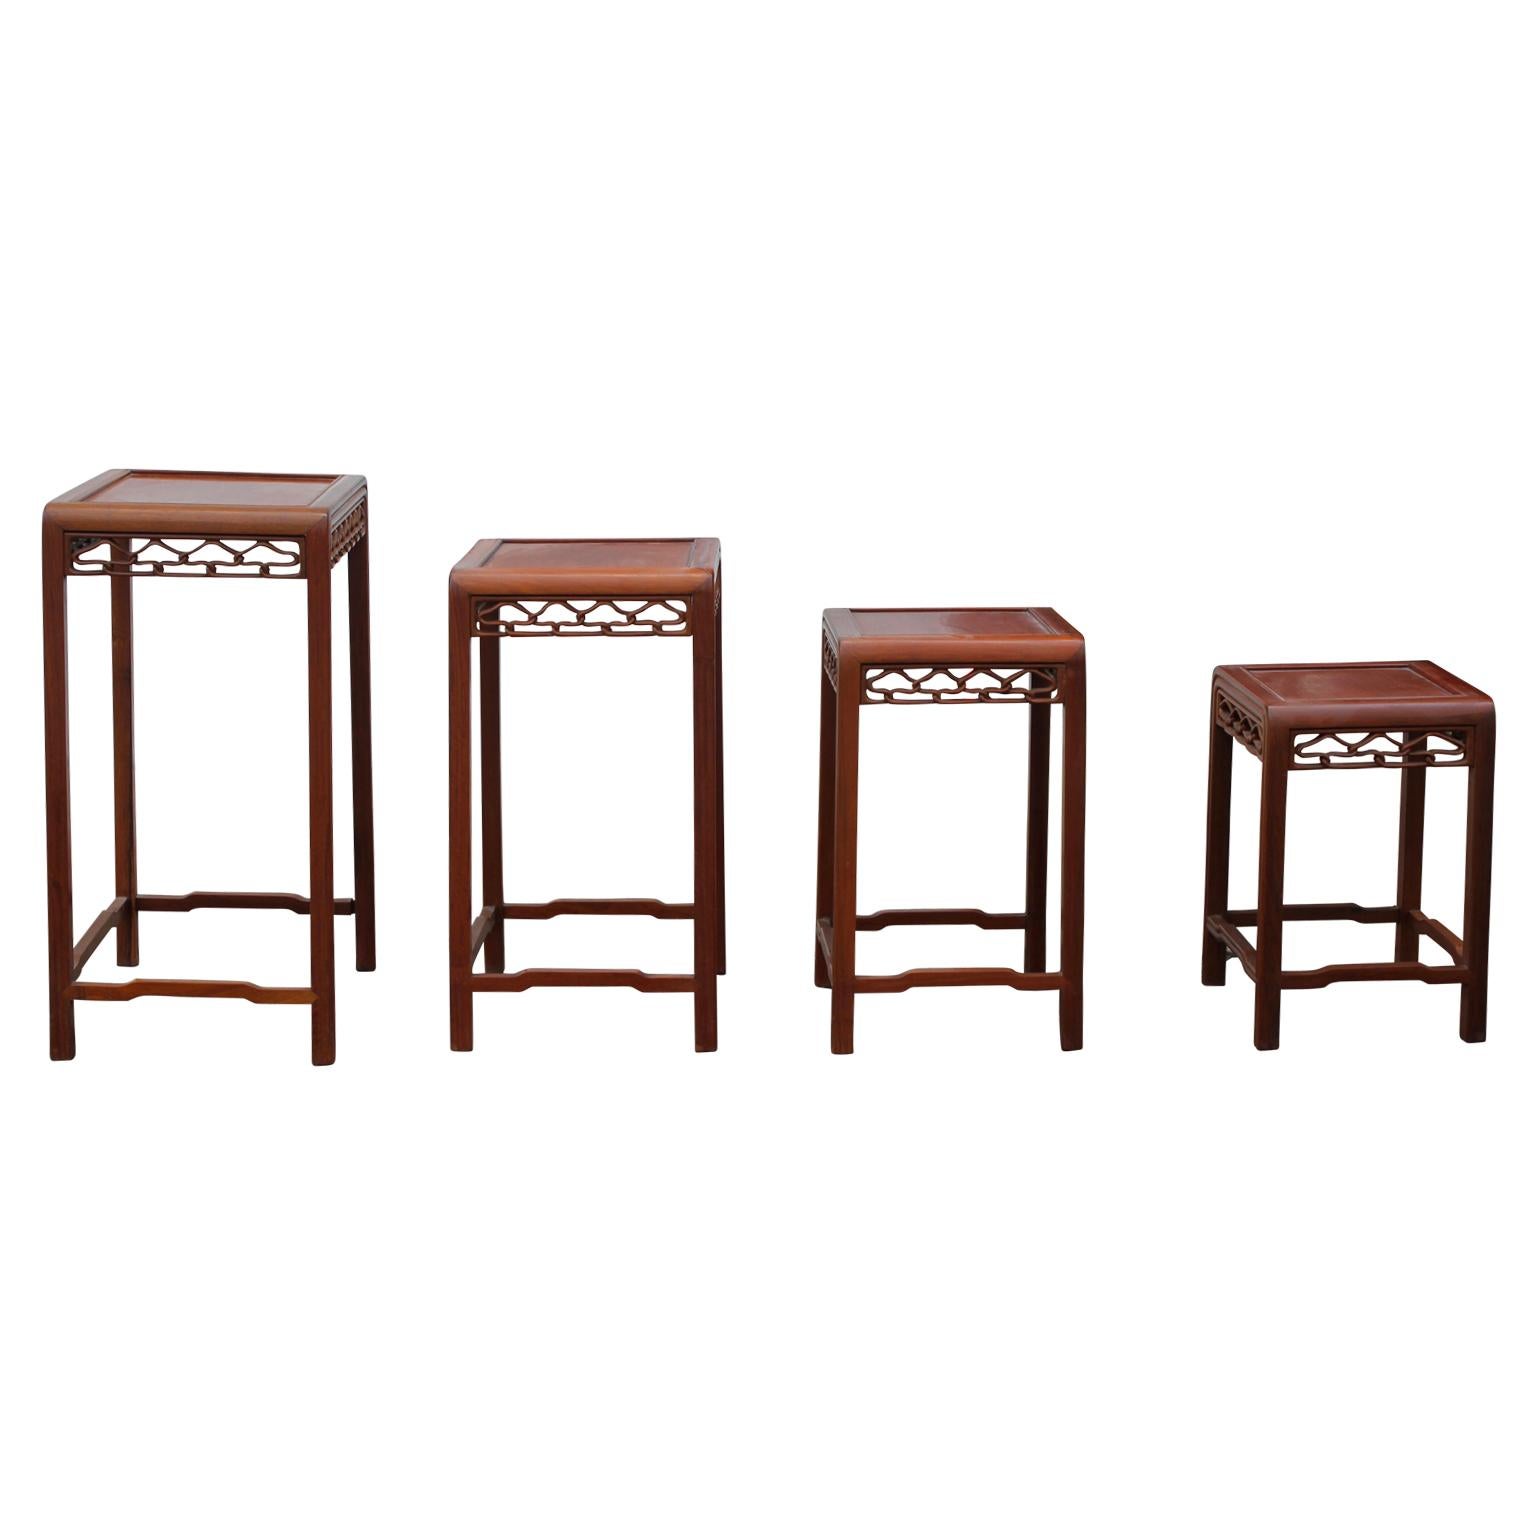 Set of Four 20th Century Modern Carved Chinese Nesting Tables 1